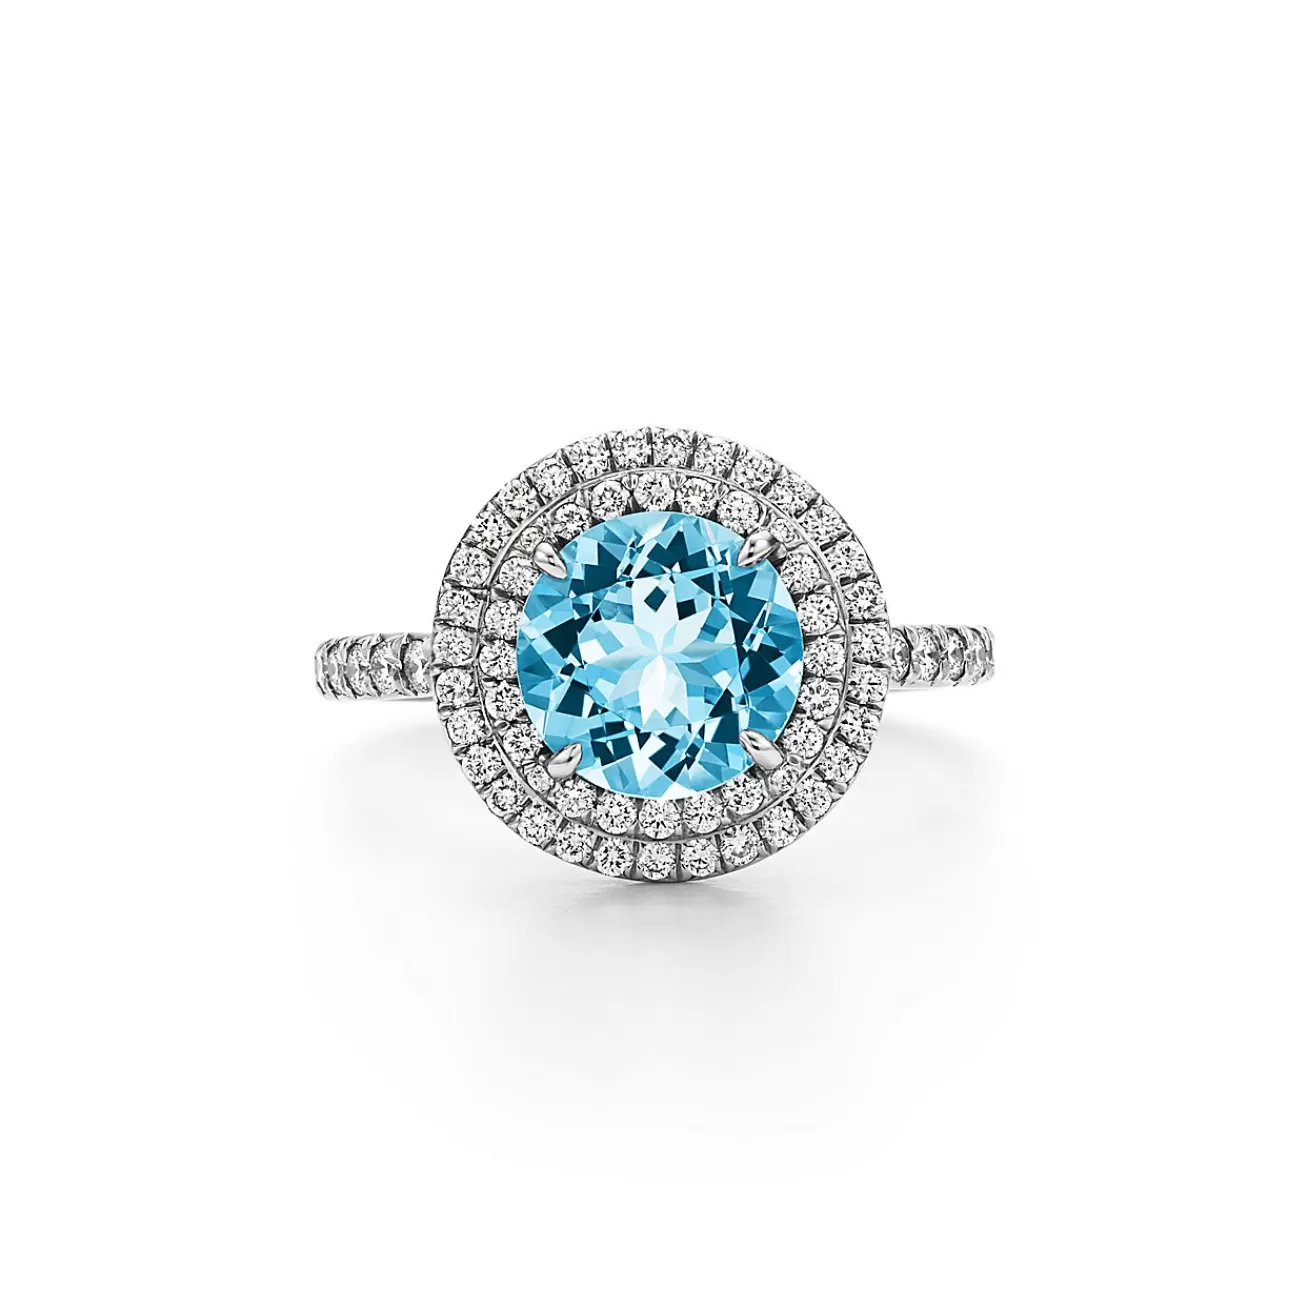 Tiffany & Co. Tiffany Soleste® ring in platinum with a .70-carat aquamarine and diamonds. | ^ Rings | Gifts for Her